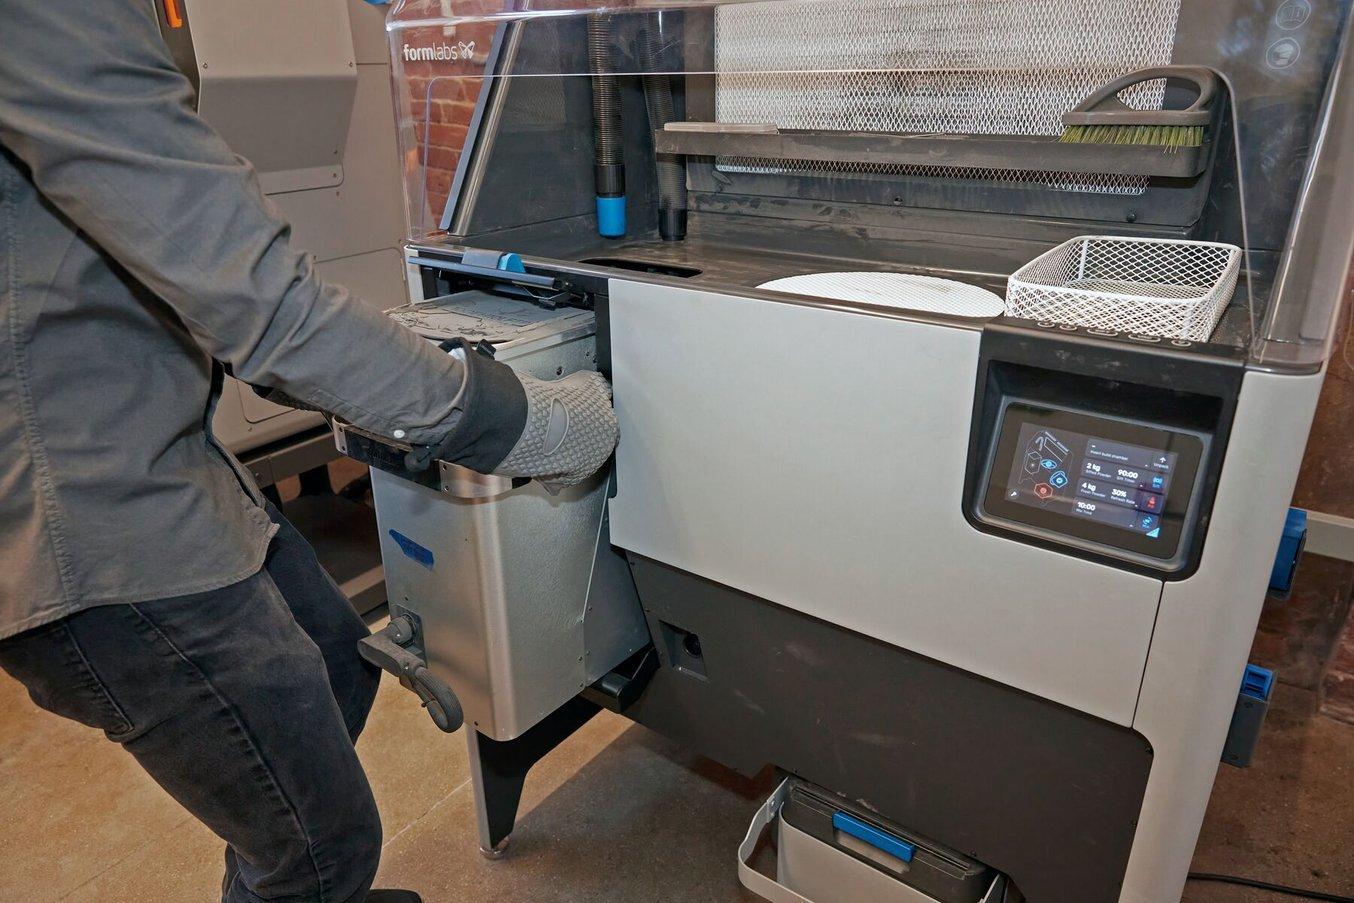 For the Fuse 1, Fuse Sift completes the SLS printing workflow. It offers a safe and efficient system for extracting prints and recycling powder.